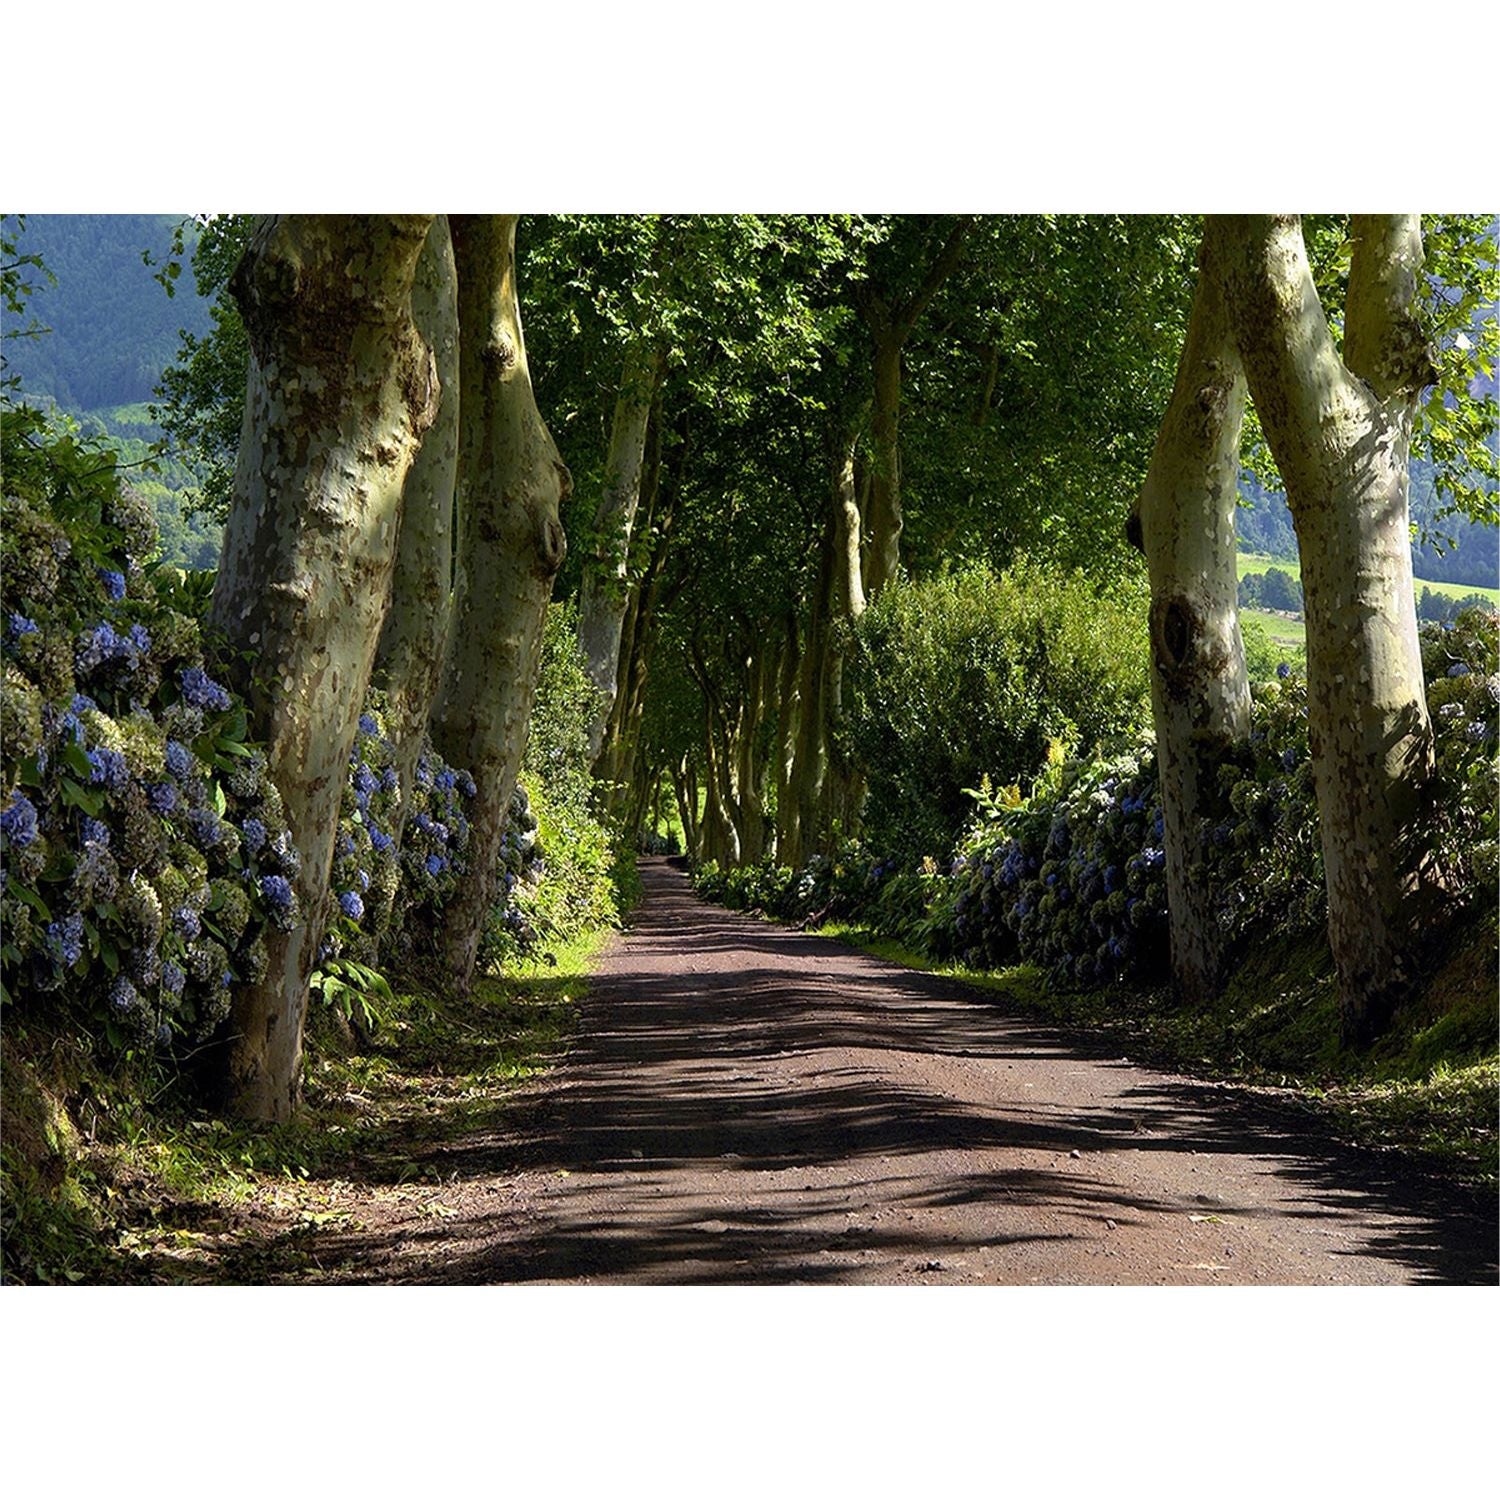 Woodland Journey: Forest Road Centerpiece Wall Mural